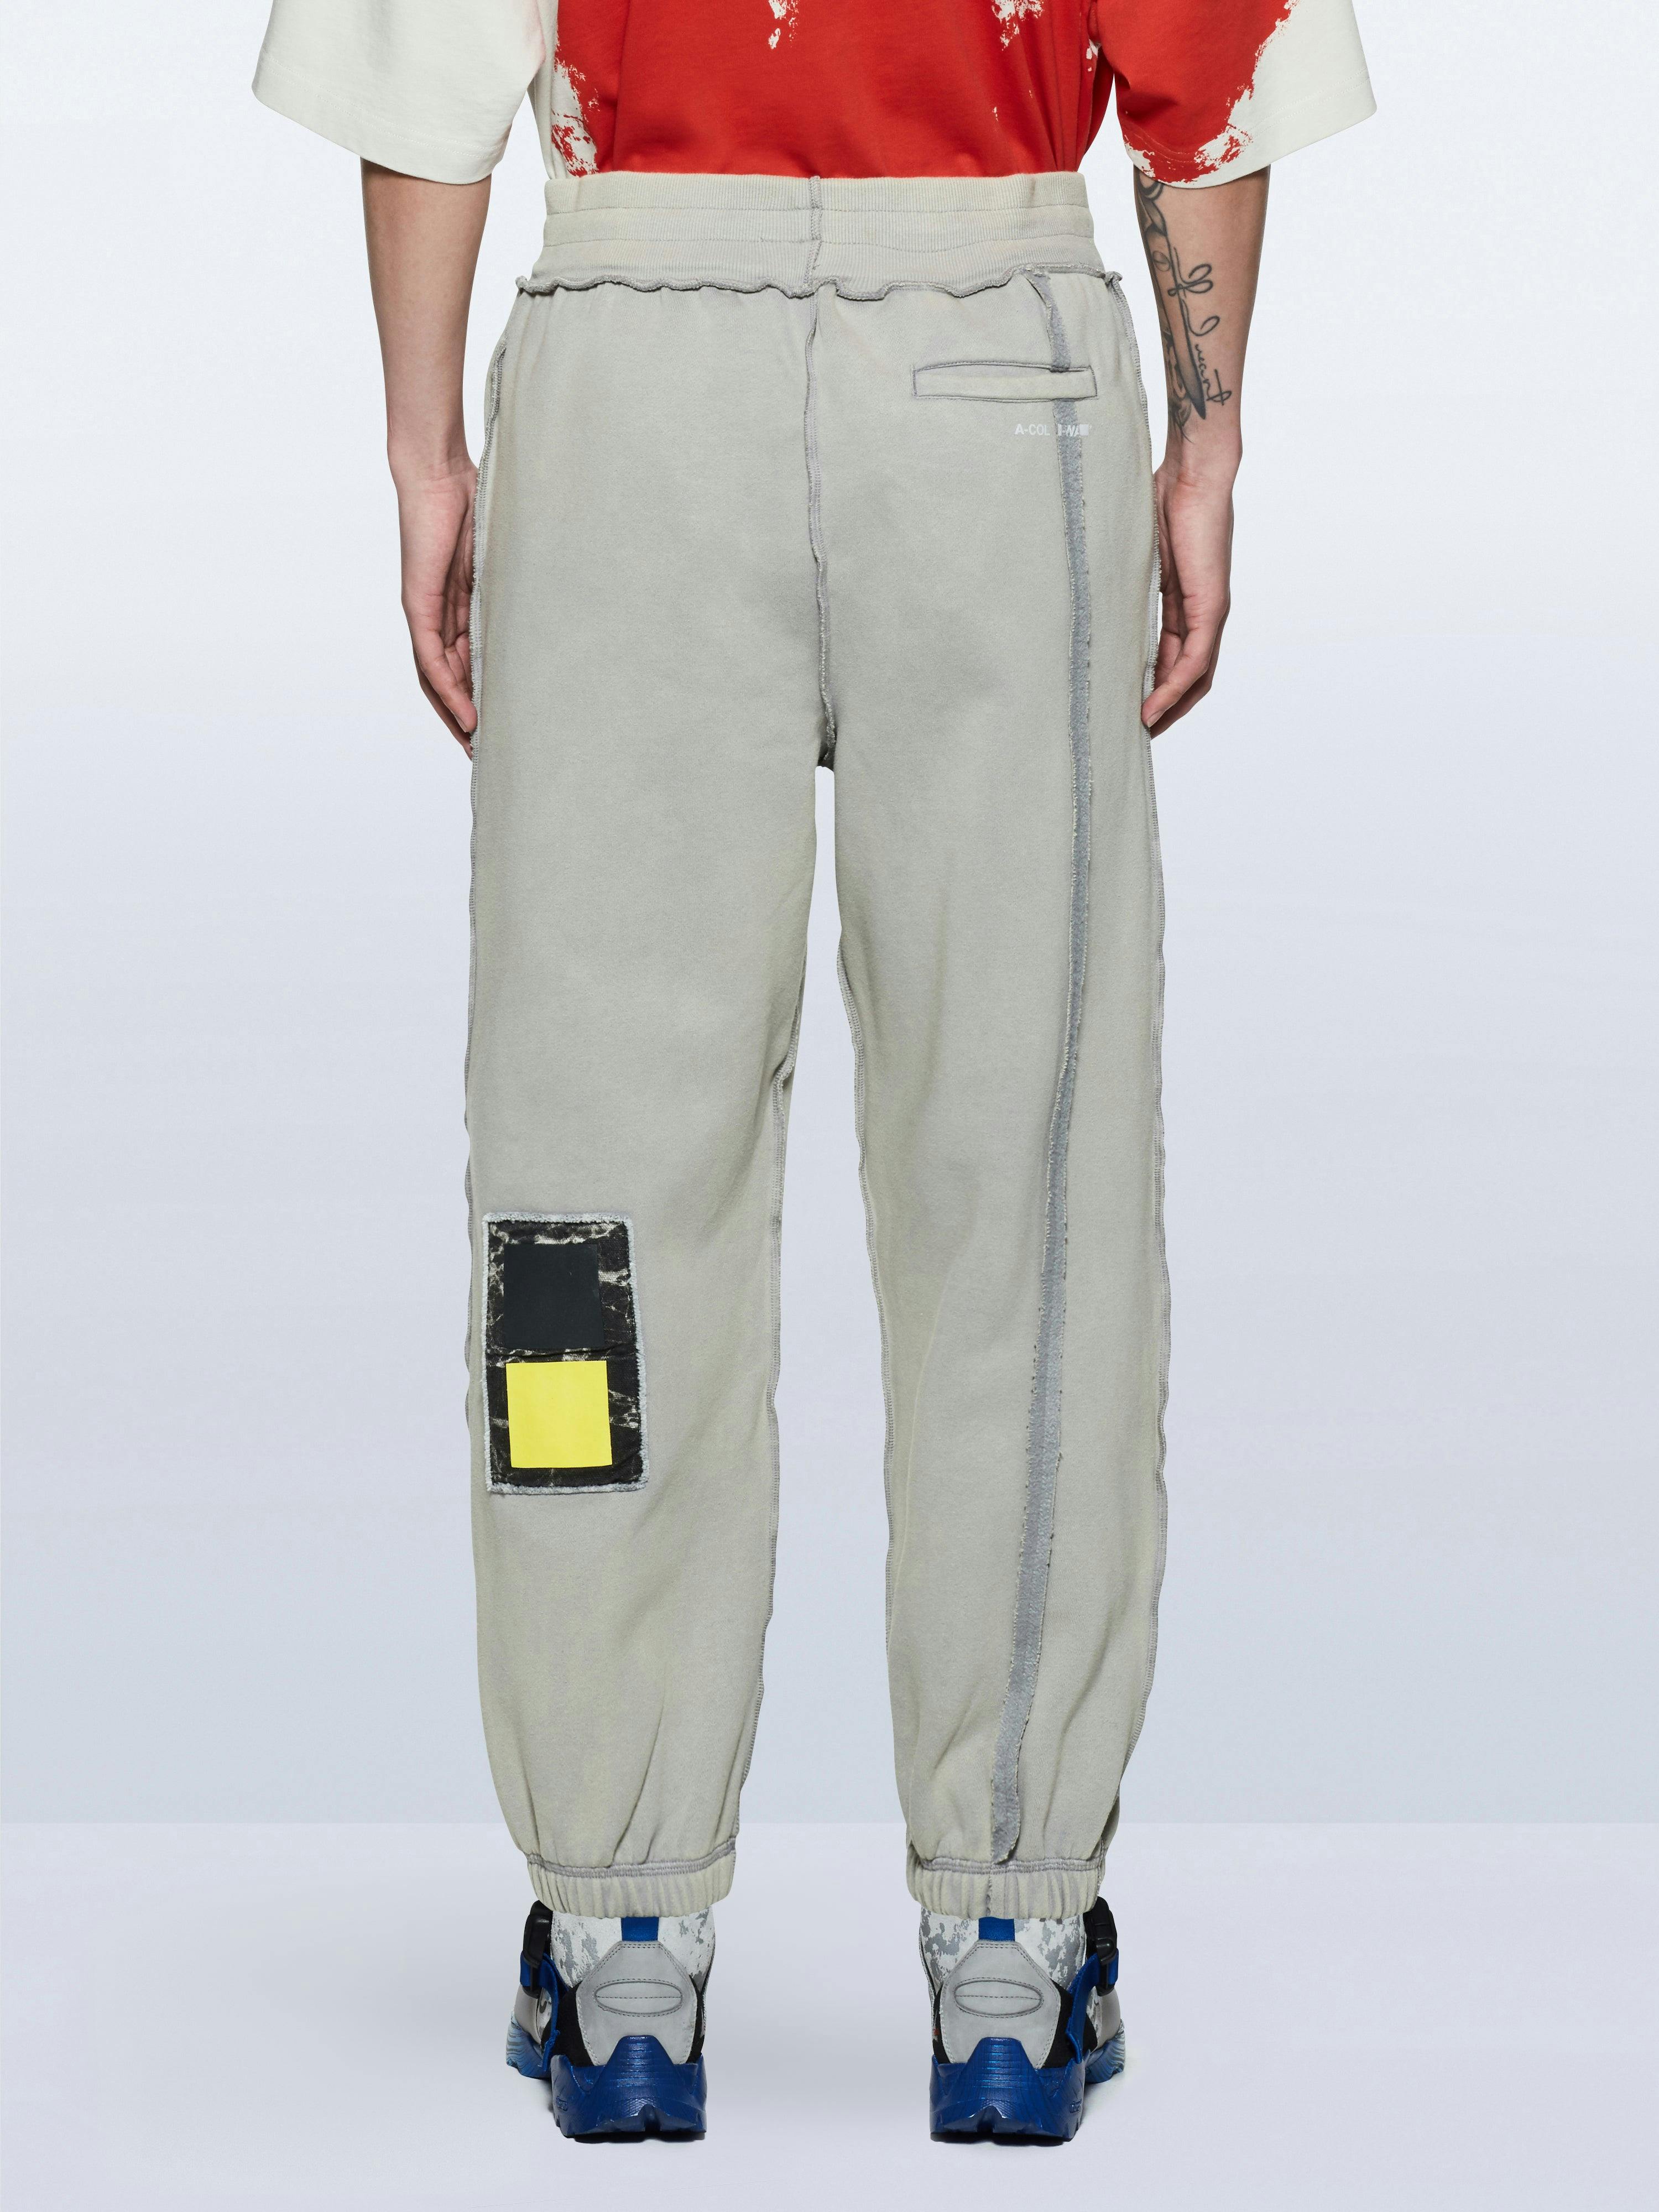 Relaxed Cubist Pants